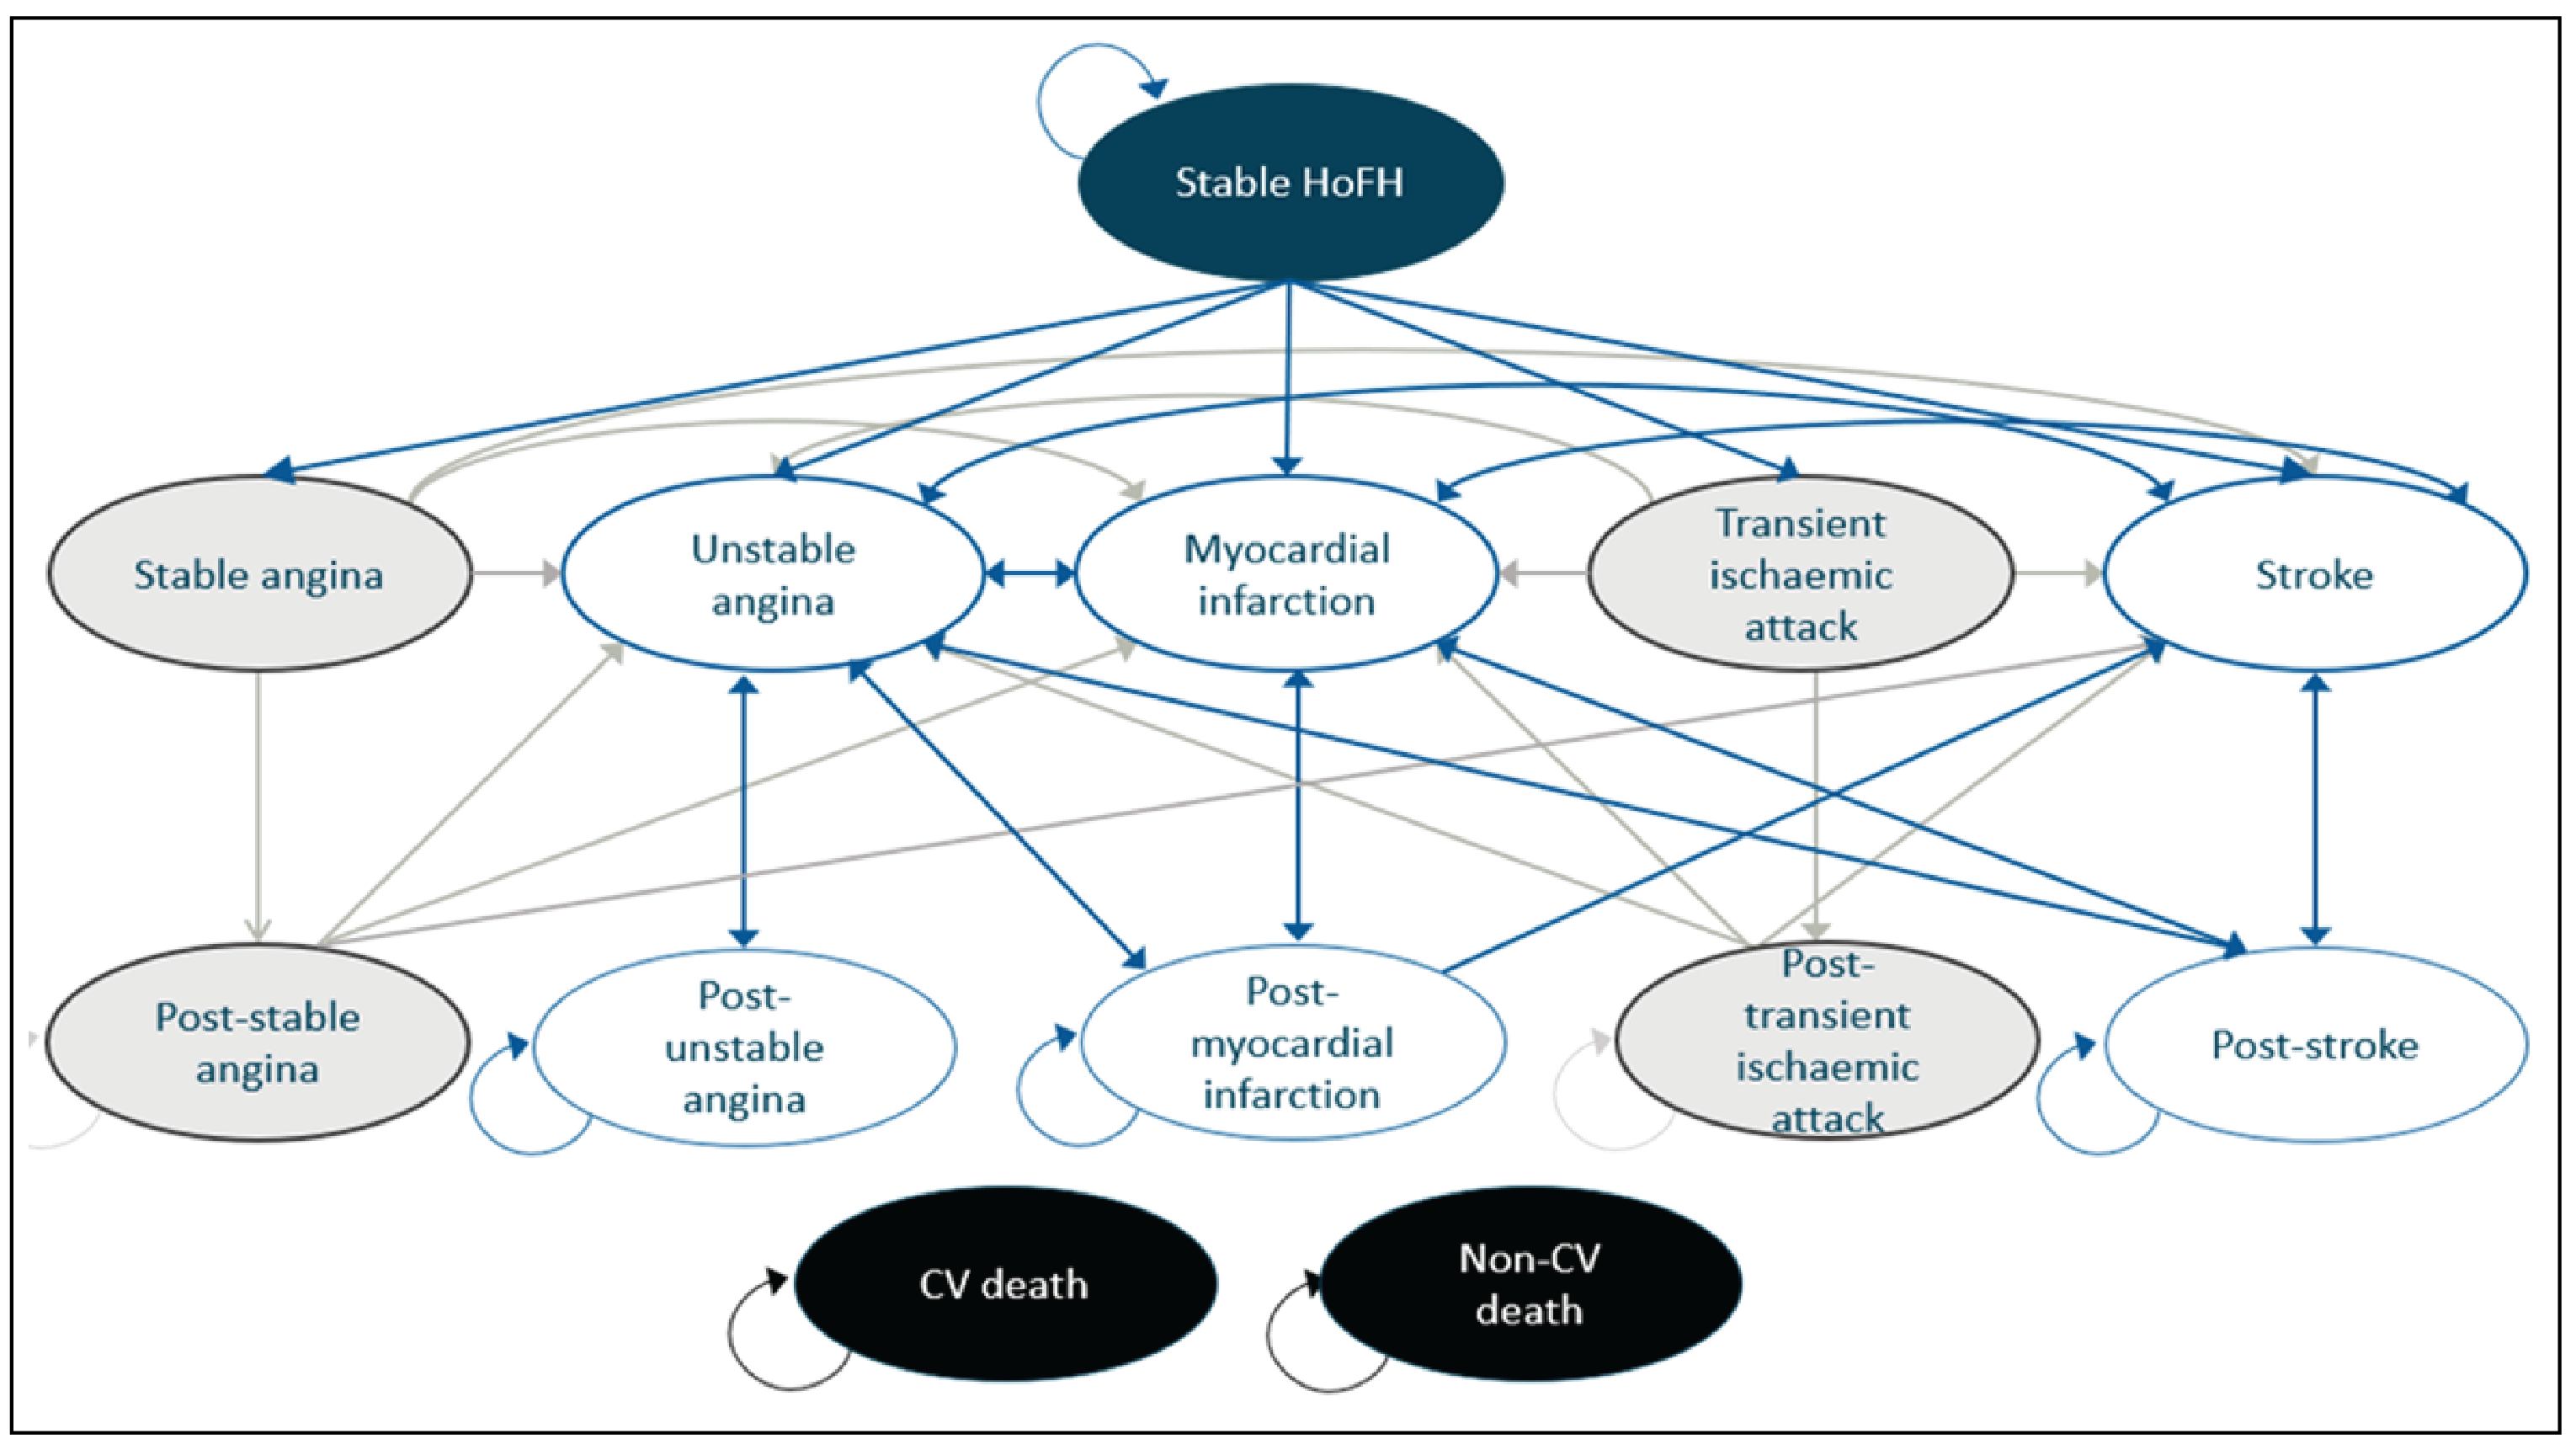 This figure depicts the model structure and how patients can move between the various health states.